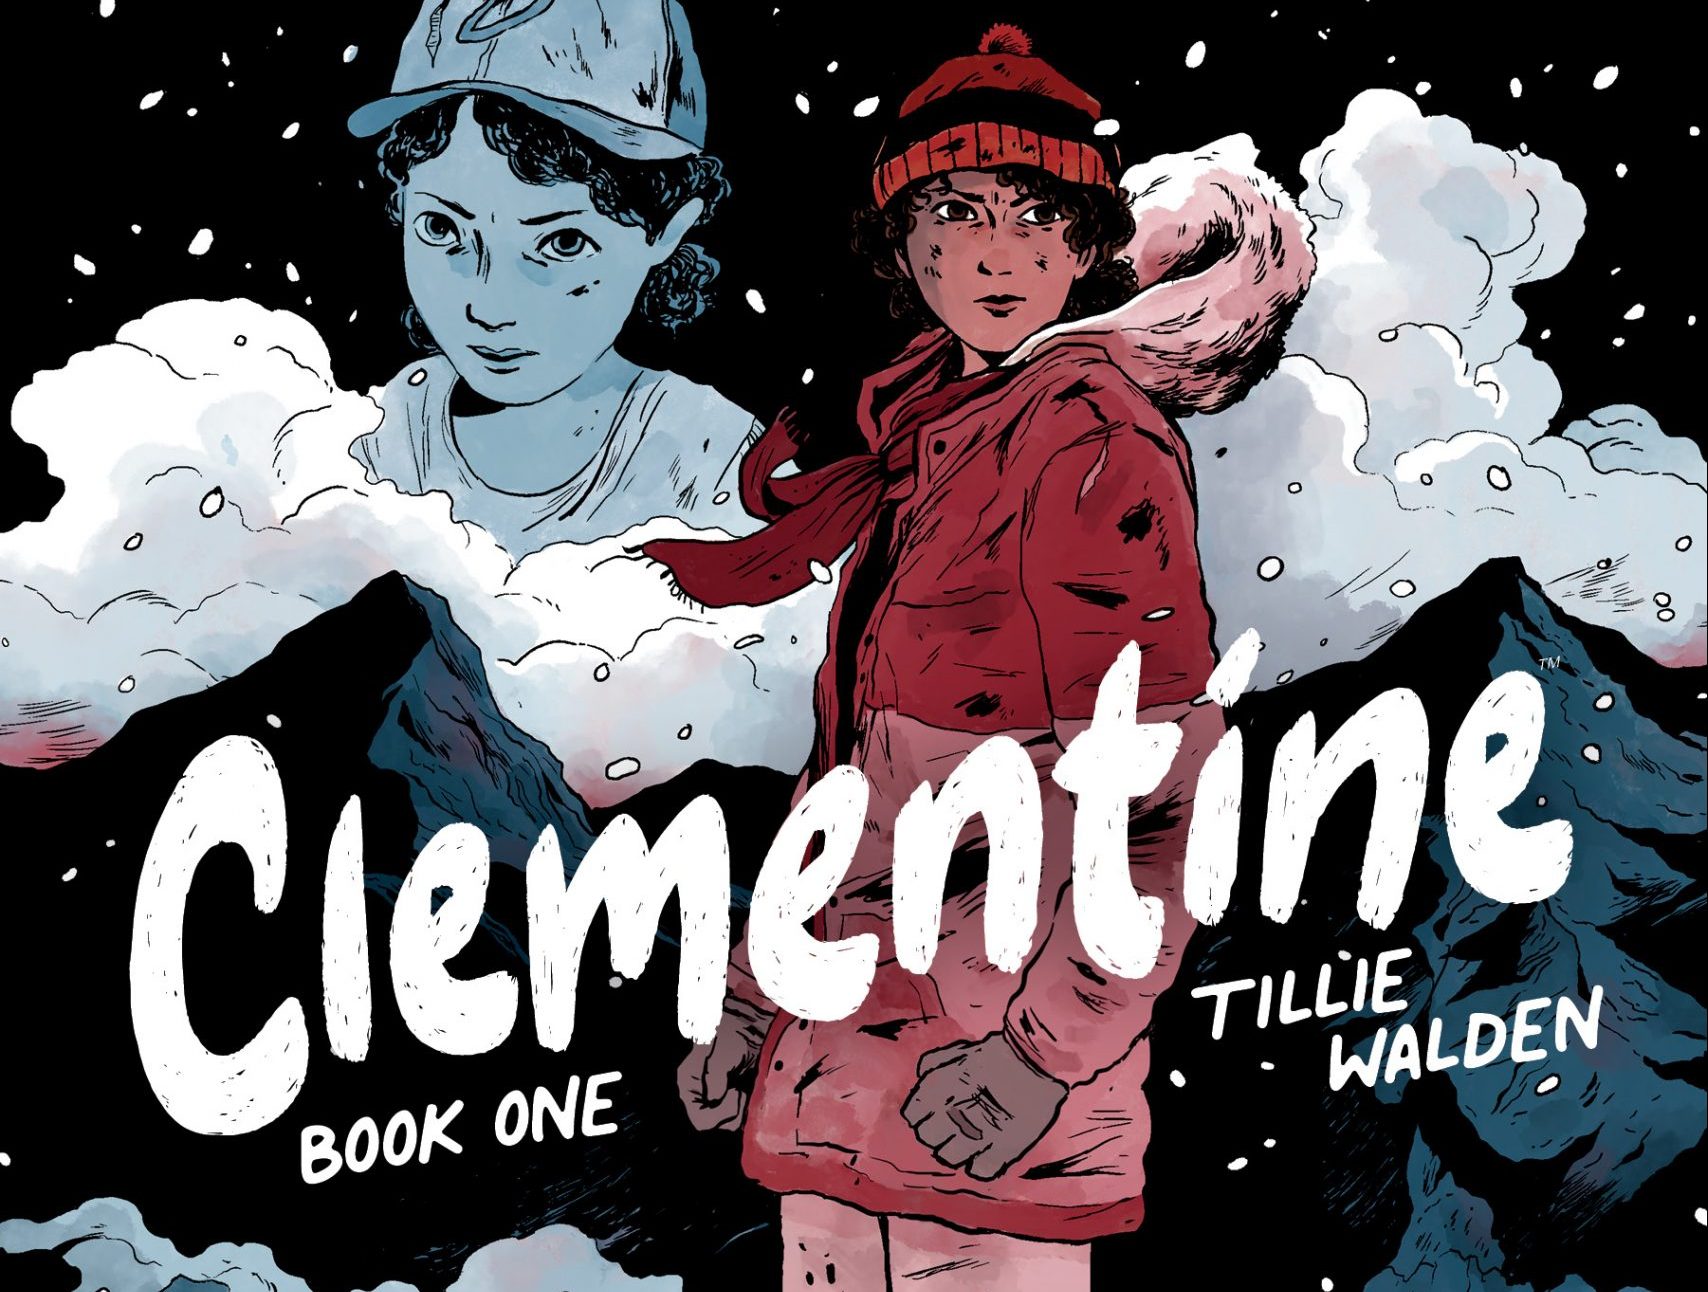 'Clementine Book One' marks the arrival of an unqualified masterwork